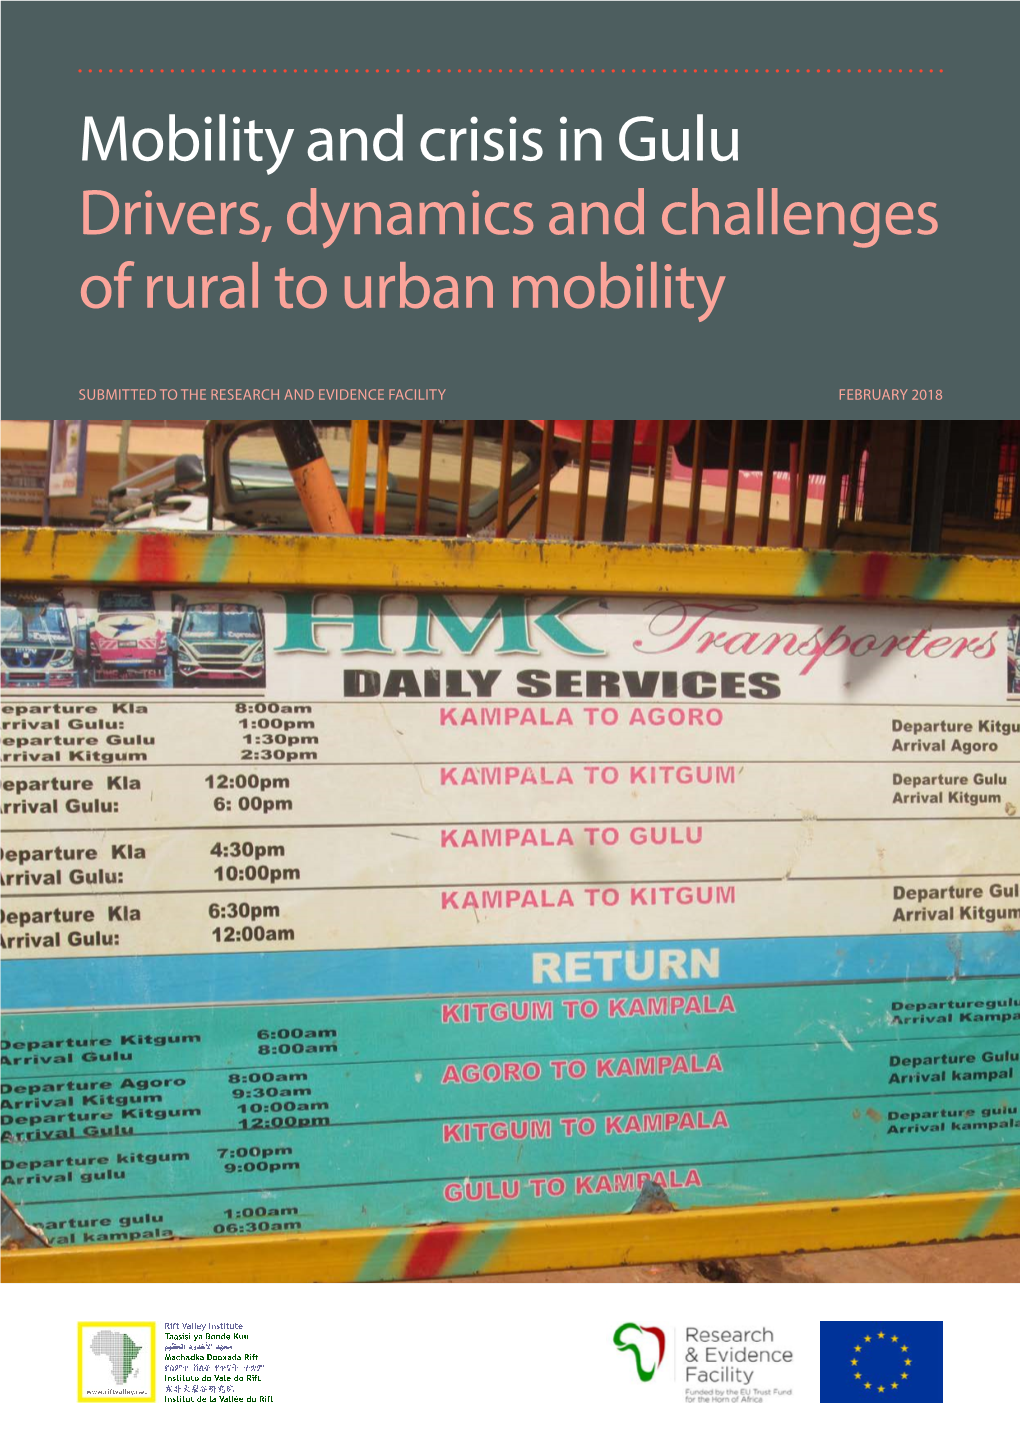 Mobility and Crisis in Gulu Drivers, Dynamics and Challenges of Rural To